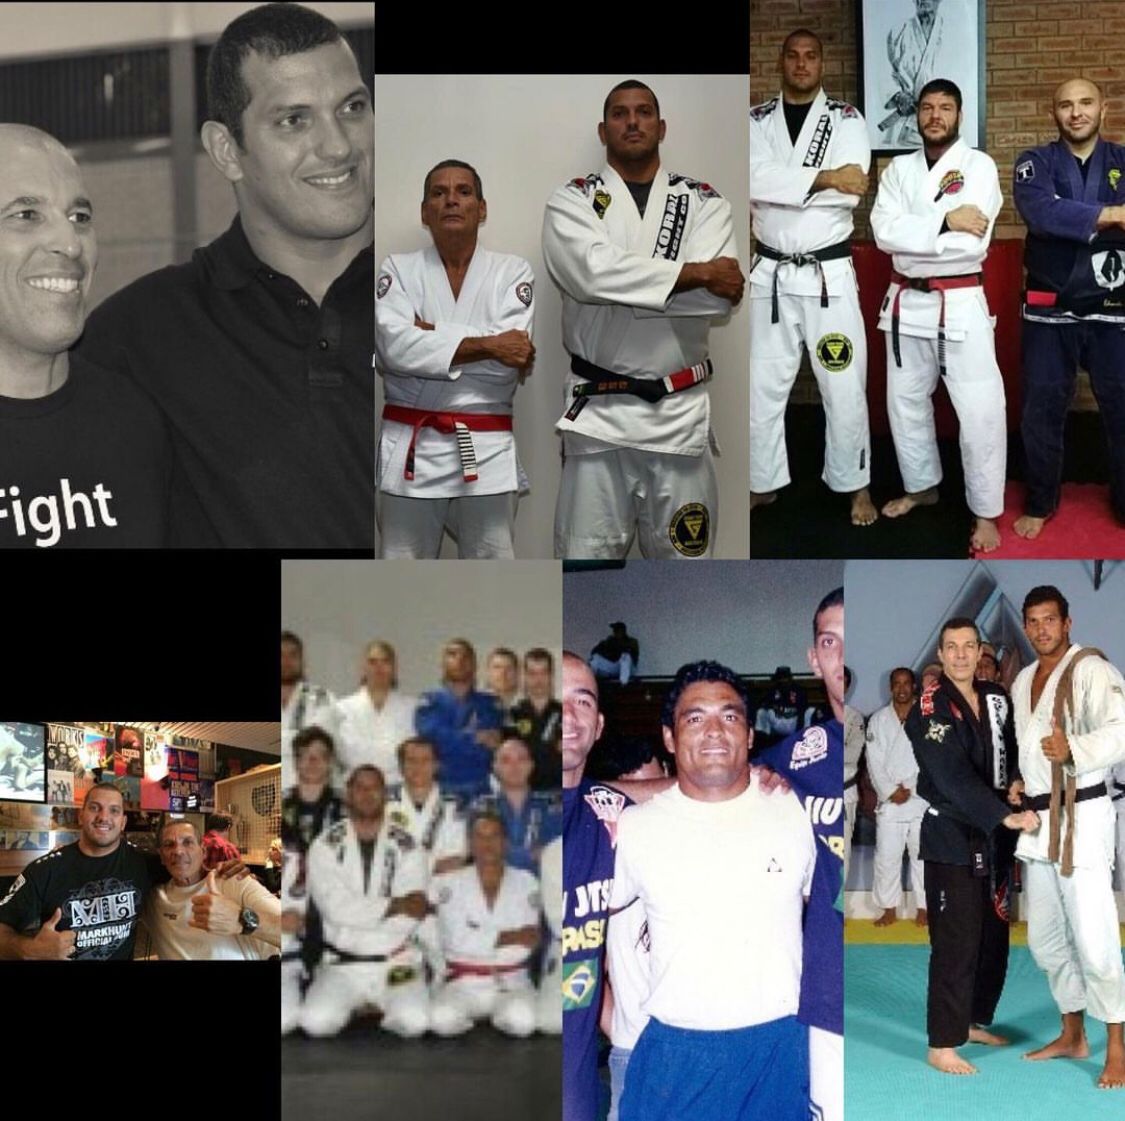 Giant with great masters in BJJ